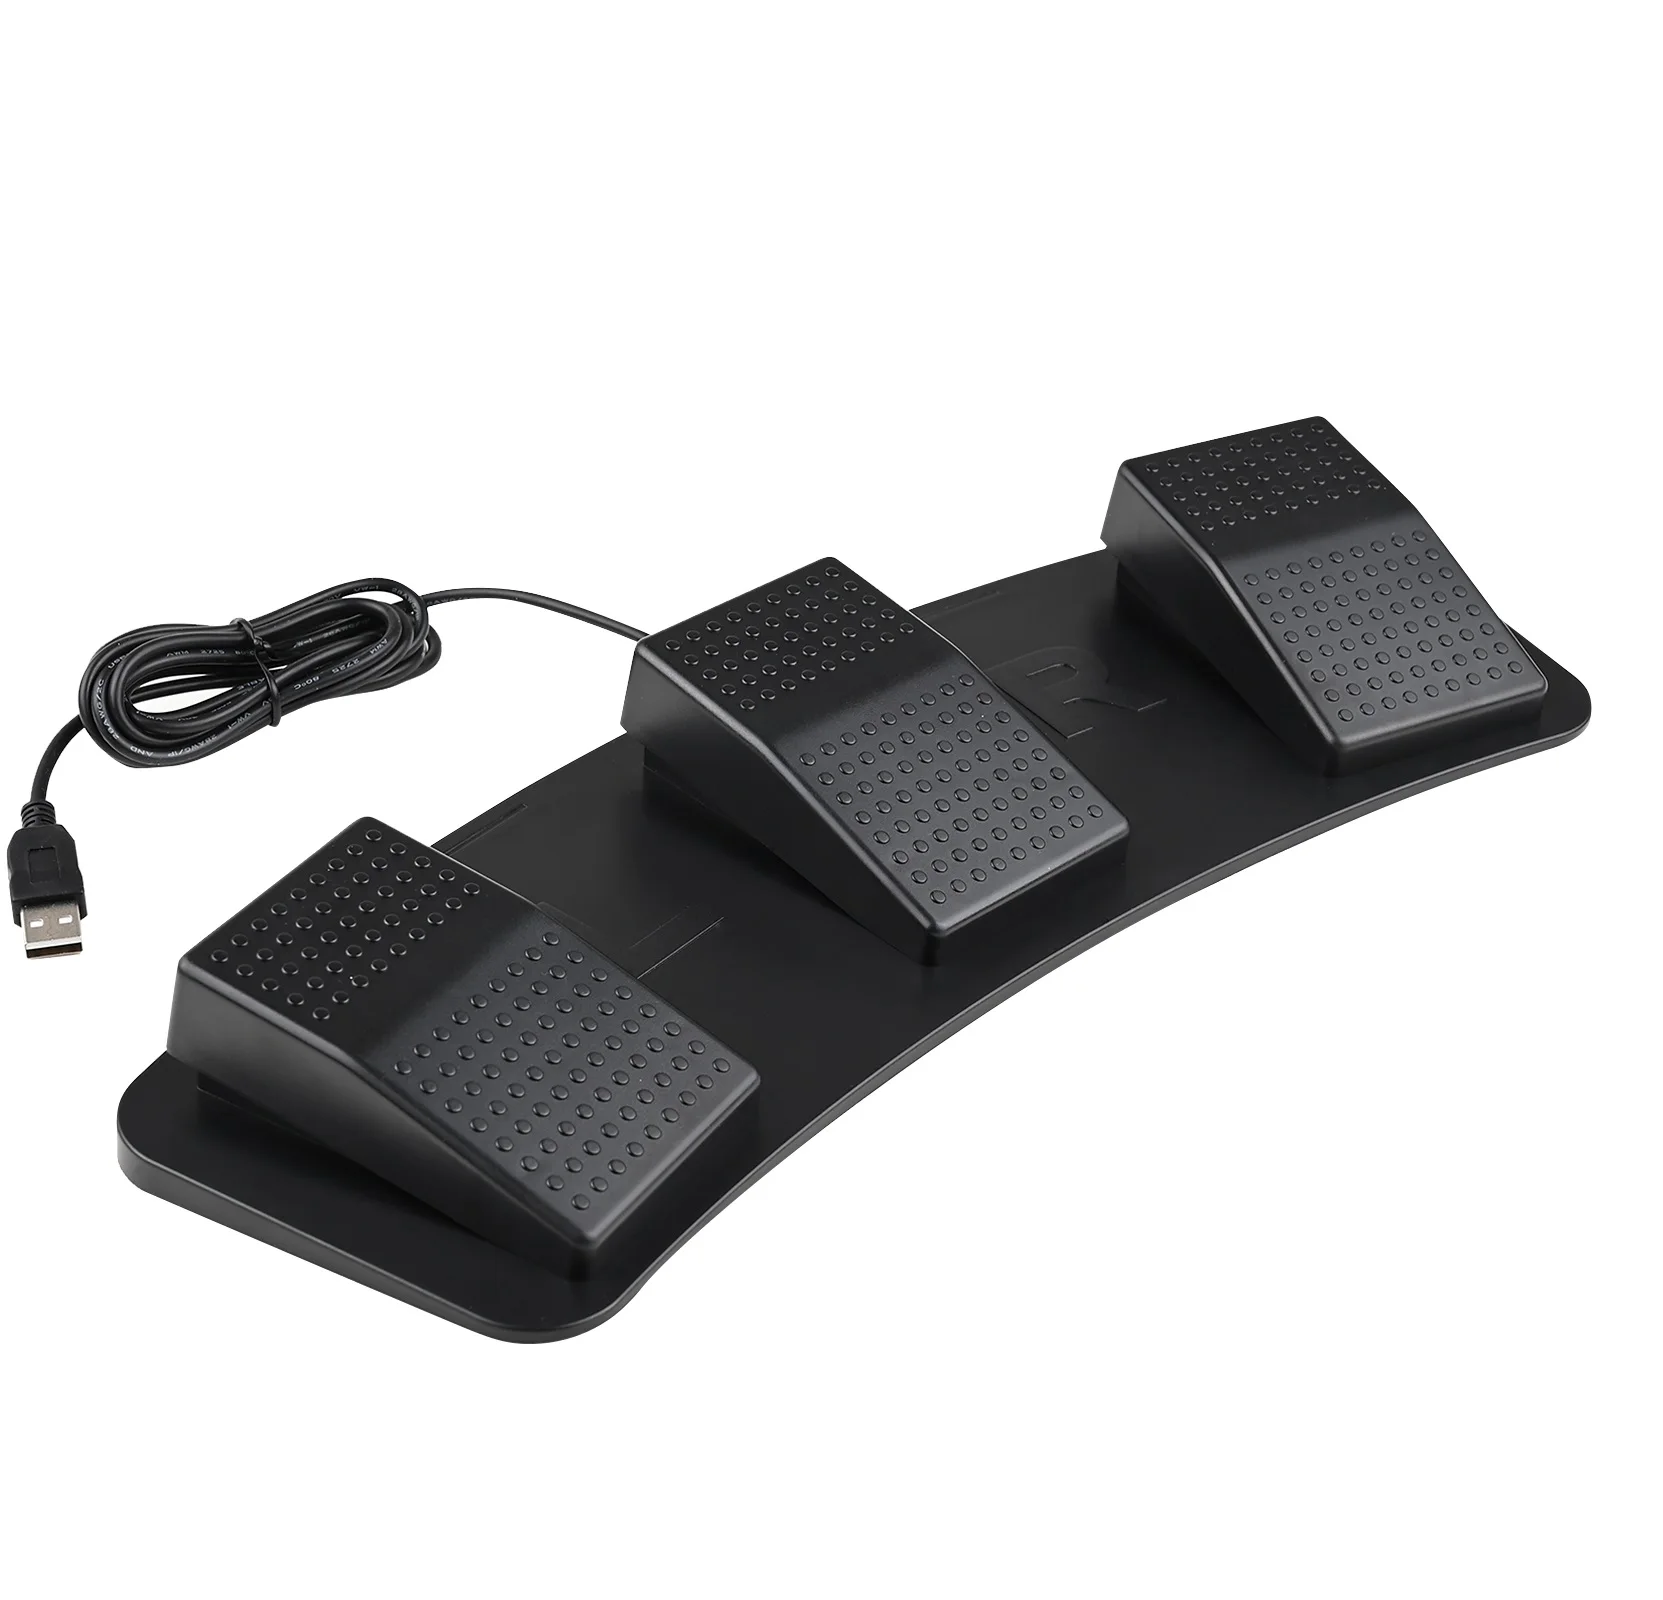 USB Foot Pedal Control Switch Game Pad Keyboard Mouse for Computer Laptop PC 